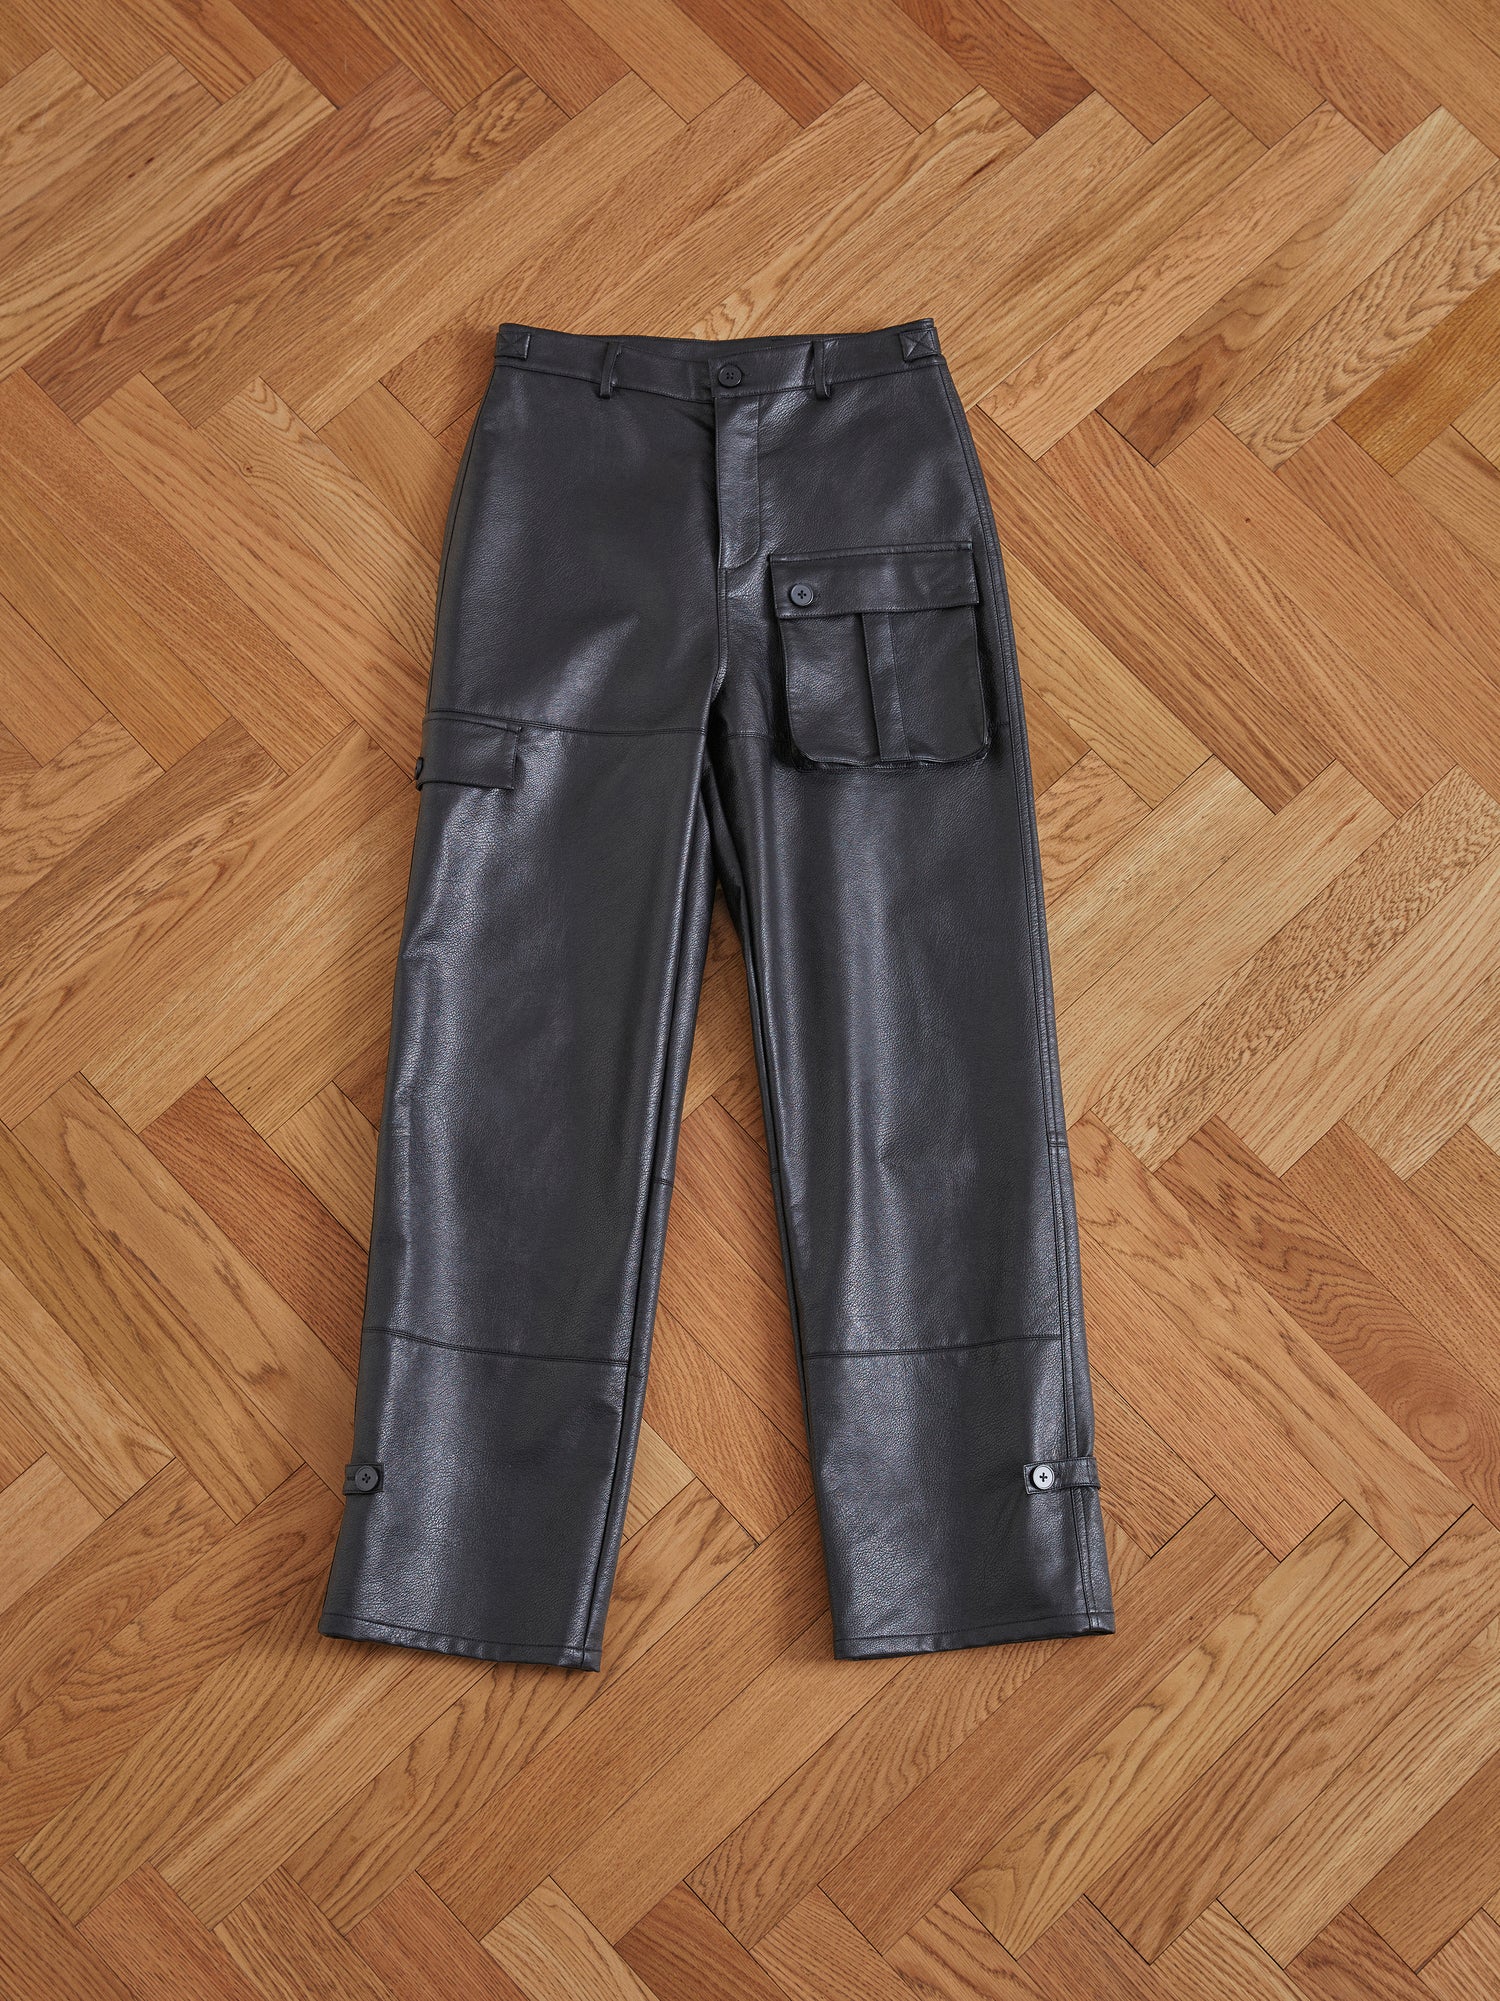 A pair of black Found faux leather cargo pants with cargo pockets on a wooden floor.